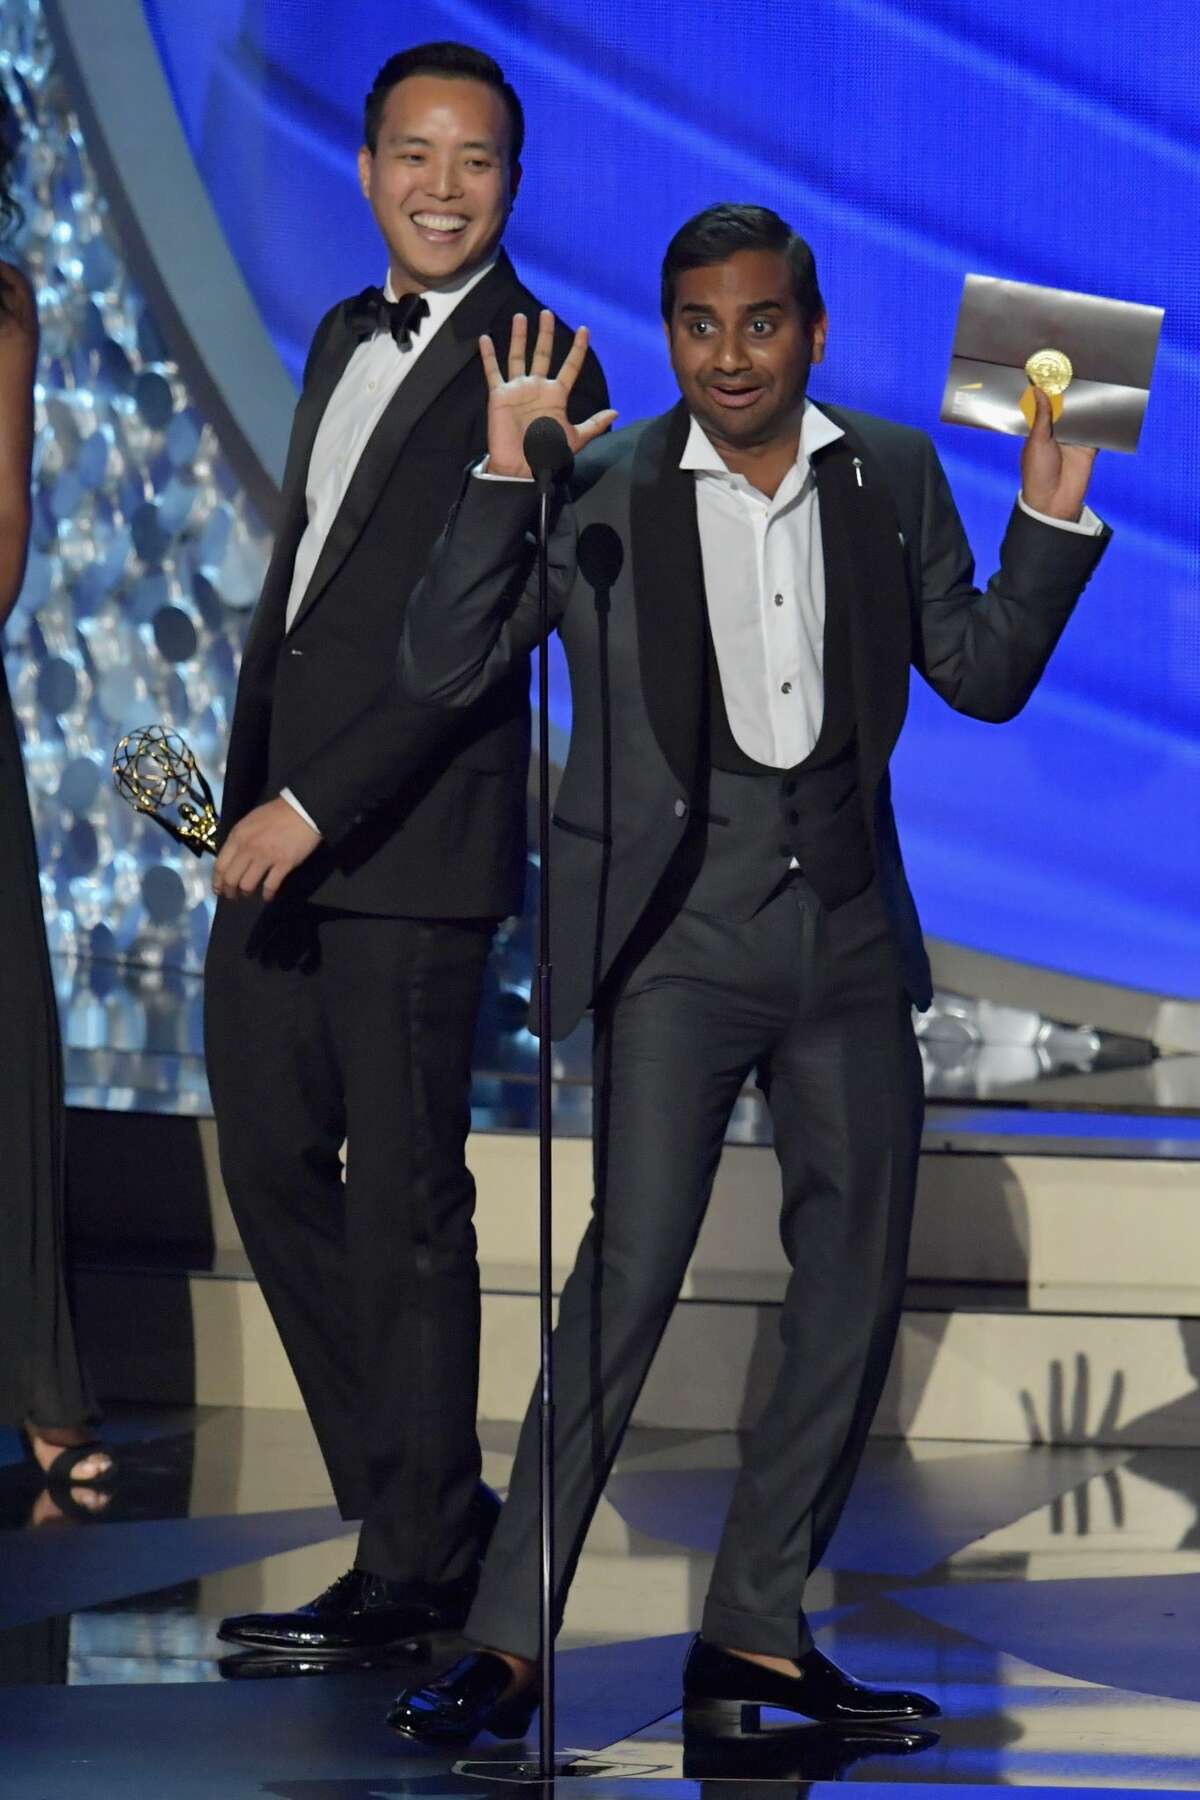 Writer/producers Alan Yang (L) and Aziz Ansari accept the Outstanding Writing for a Comedy Series award for the 'Master of None' episode 'Parents' onstage during the 68th Annual Primetime Emmy Awards at Microsoft Theater on September 18, 2016 in Los Angeles, California.